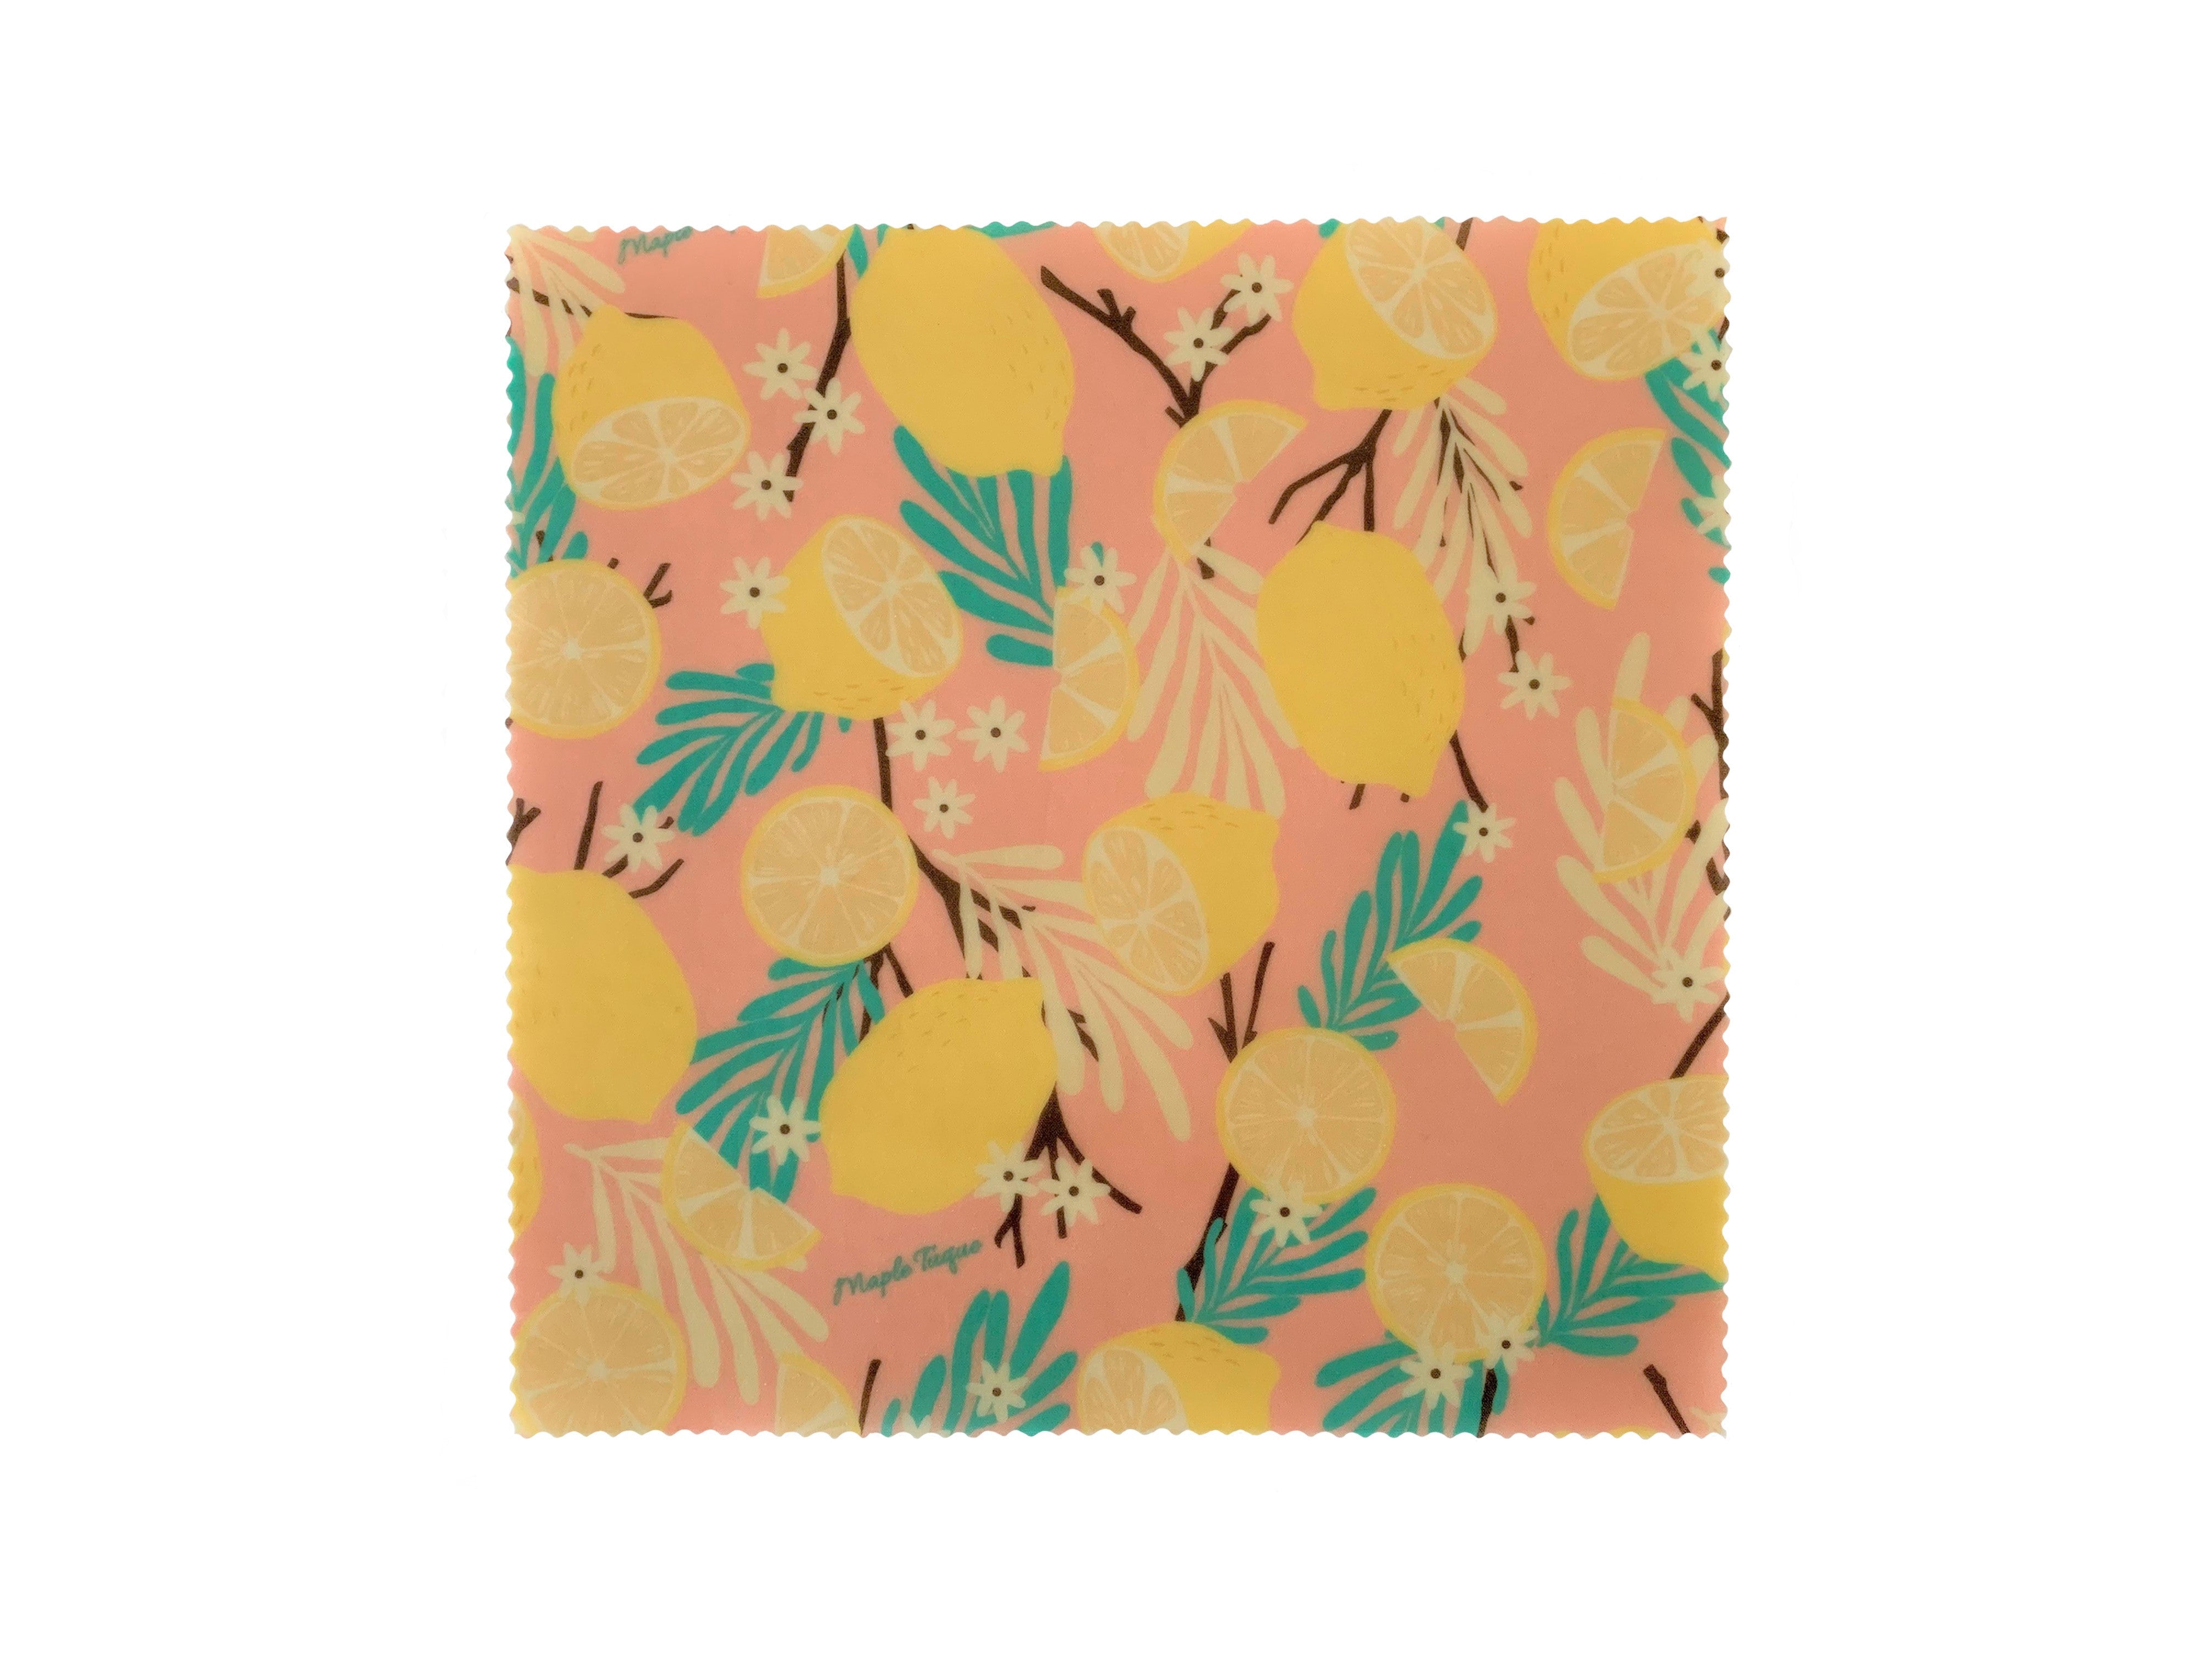 Beeswax Wrap Size: M 12x12"